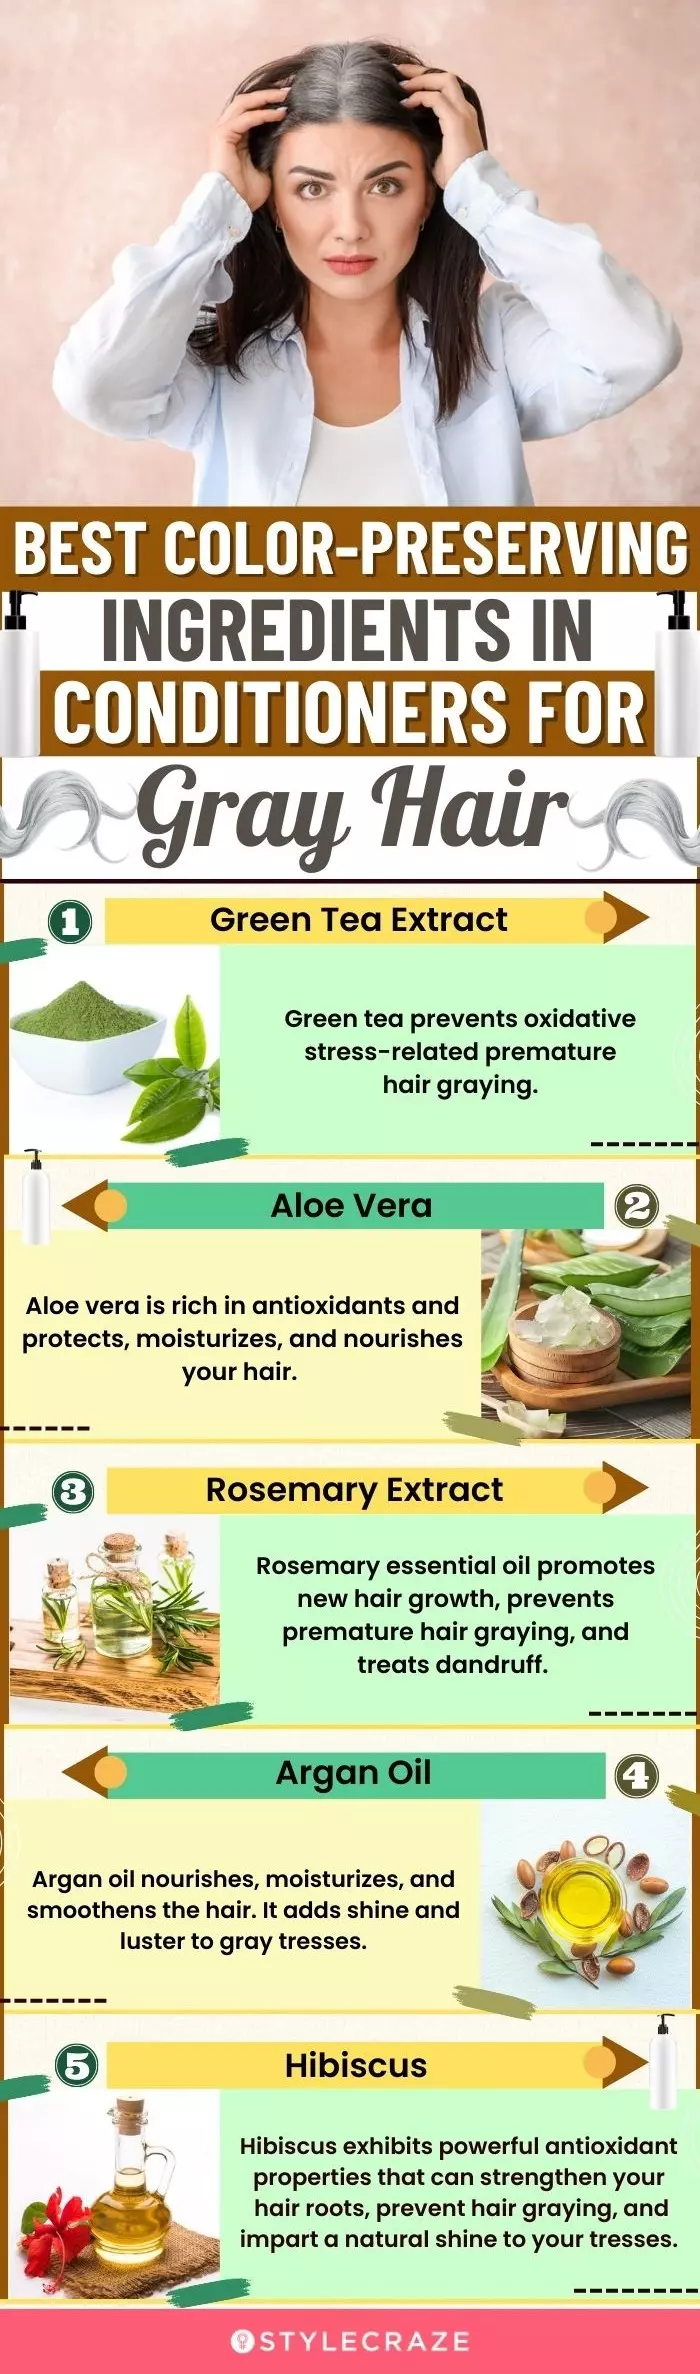 Color-Preserving Ingredients In Conditioners For Gray Hair (infographic)